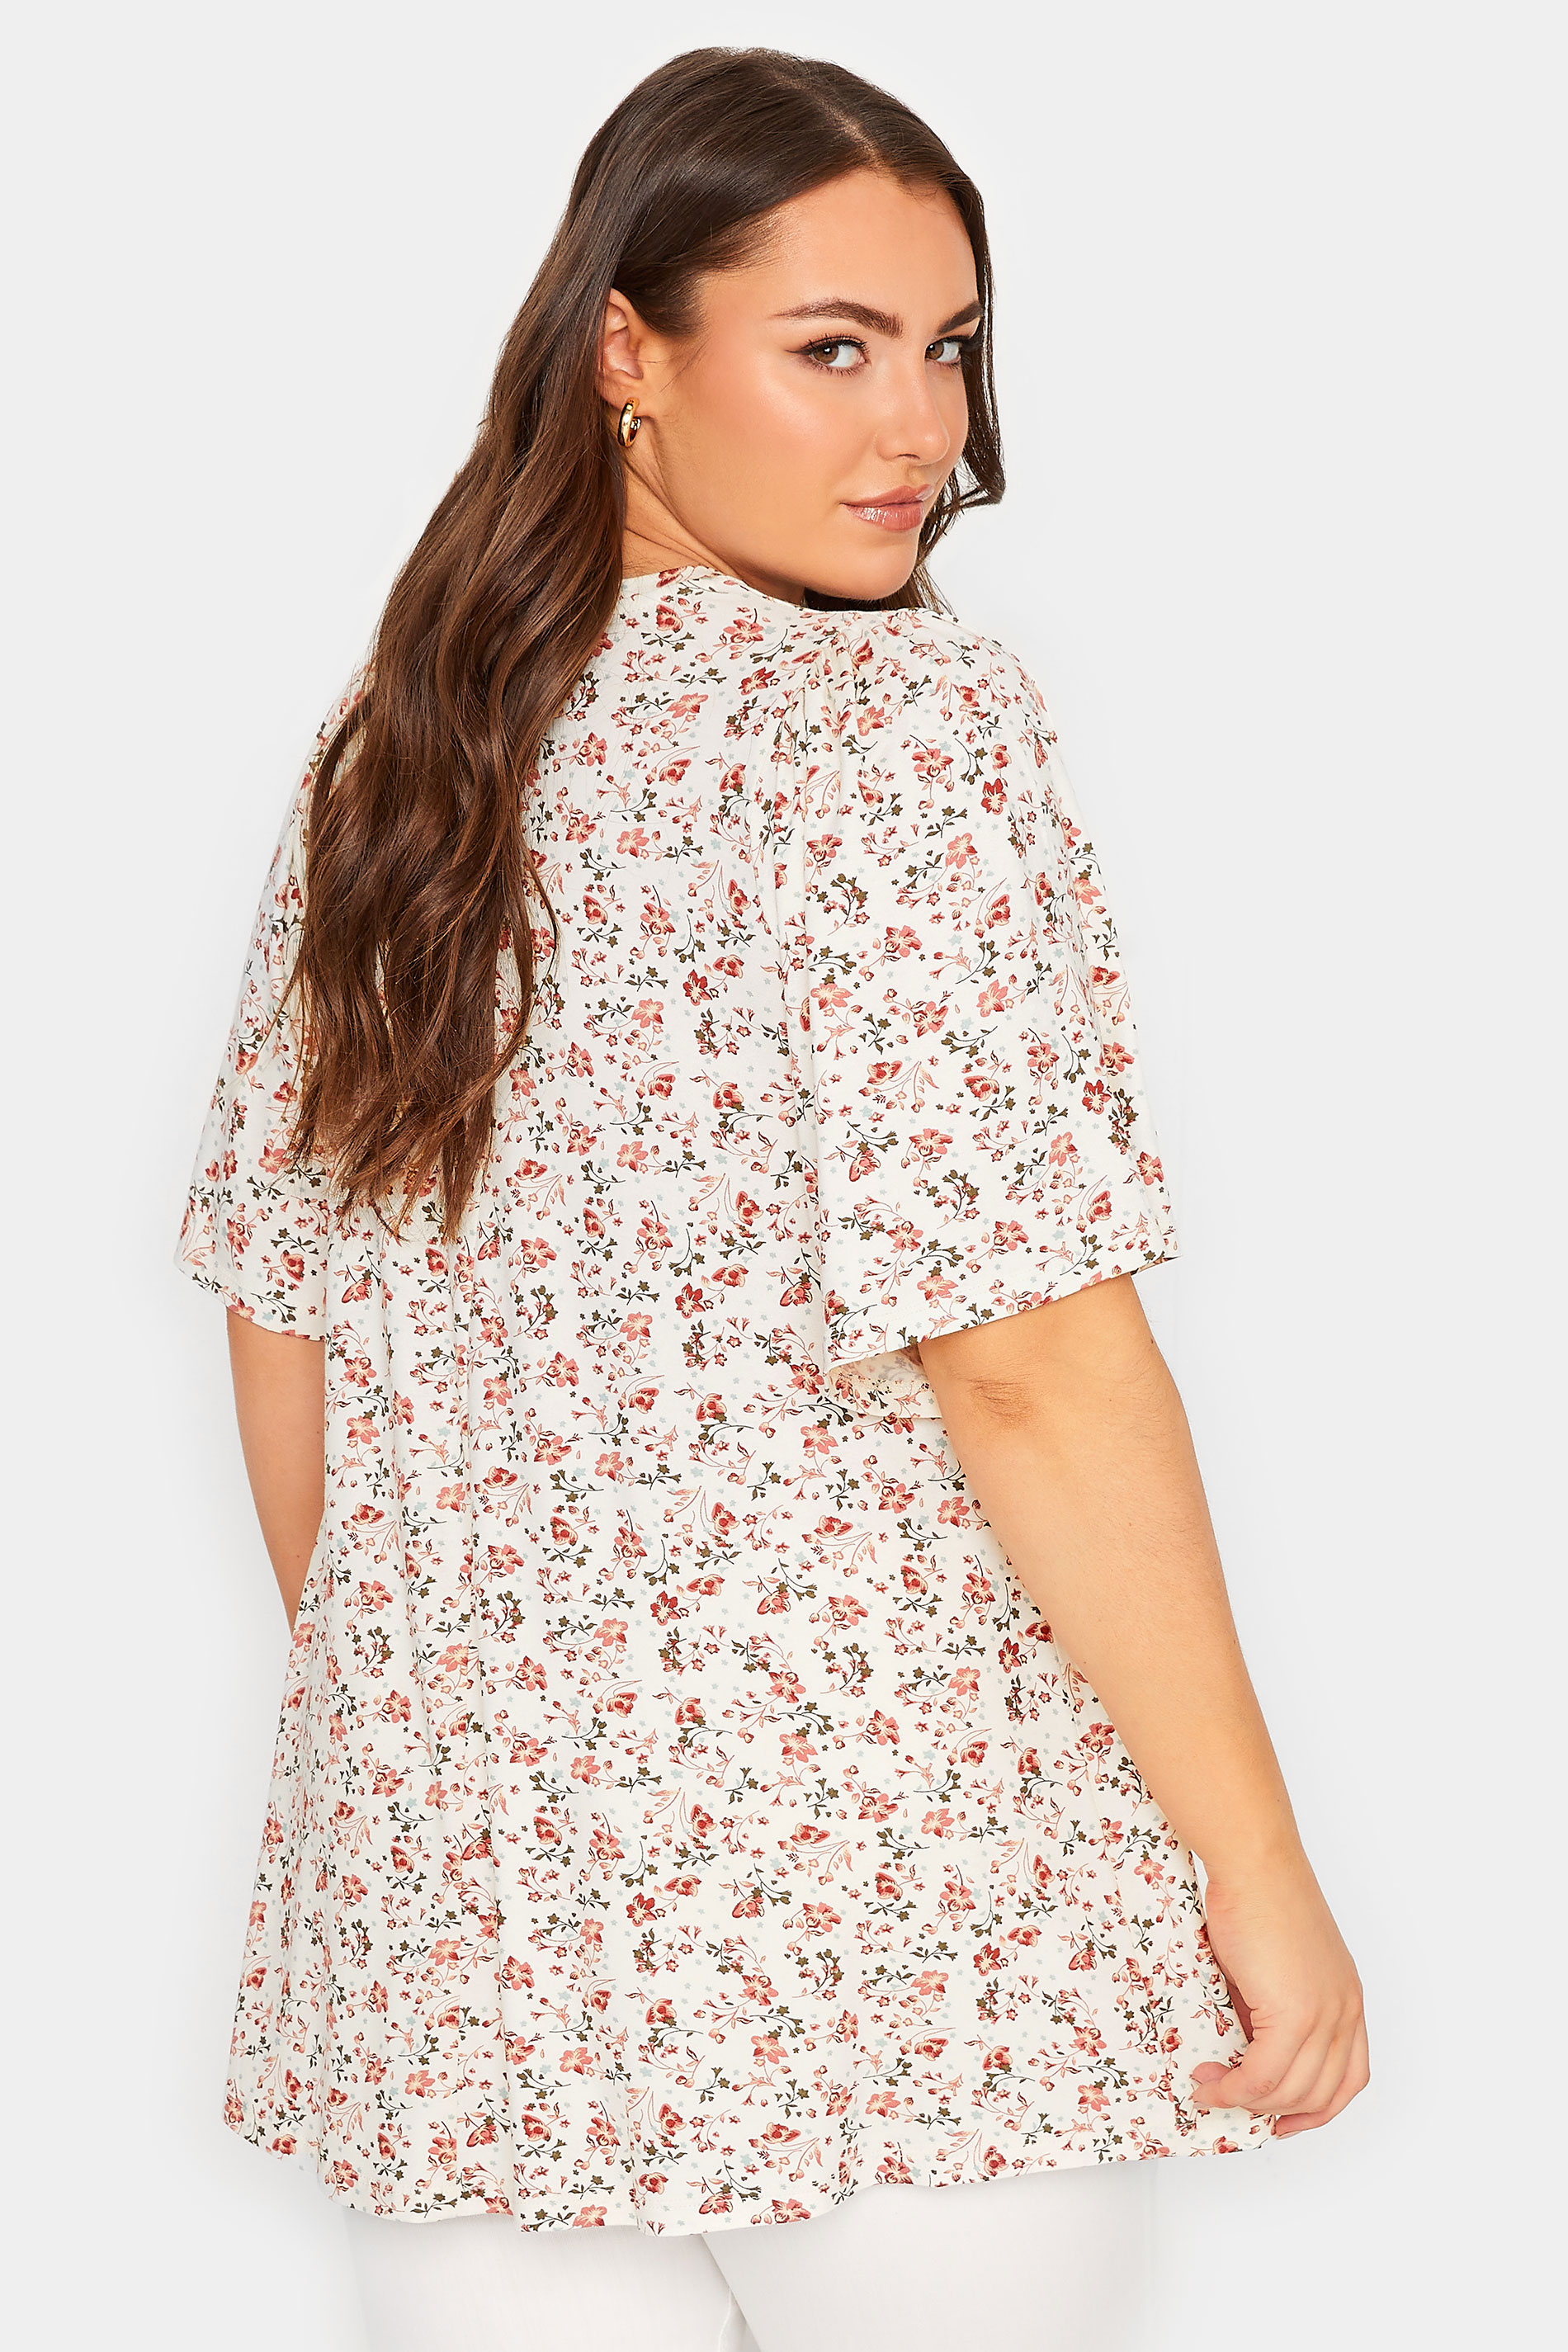 YOURS Plus Size White Floral Pleat Front Swing Top | Yours Clothing 3